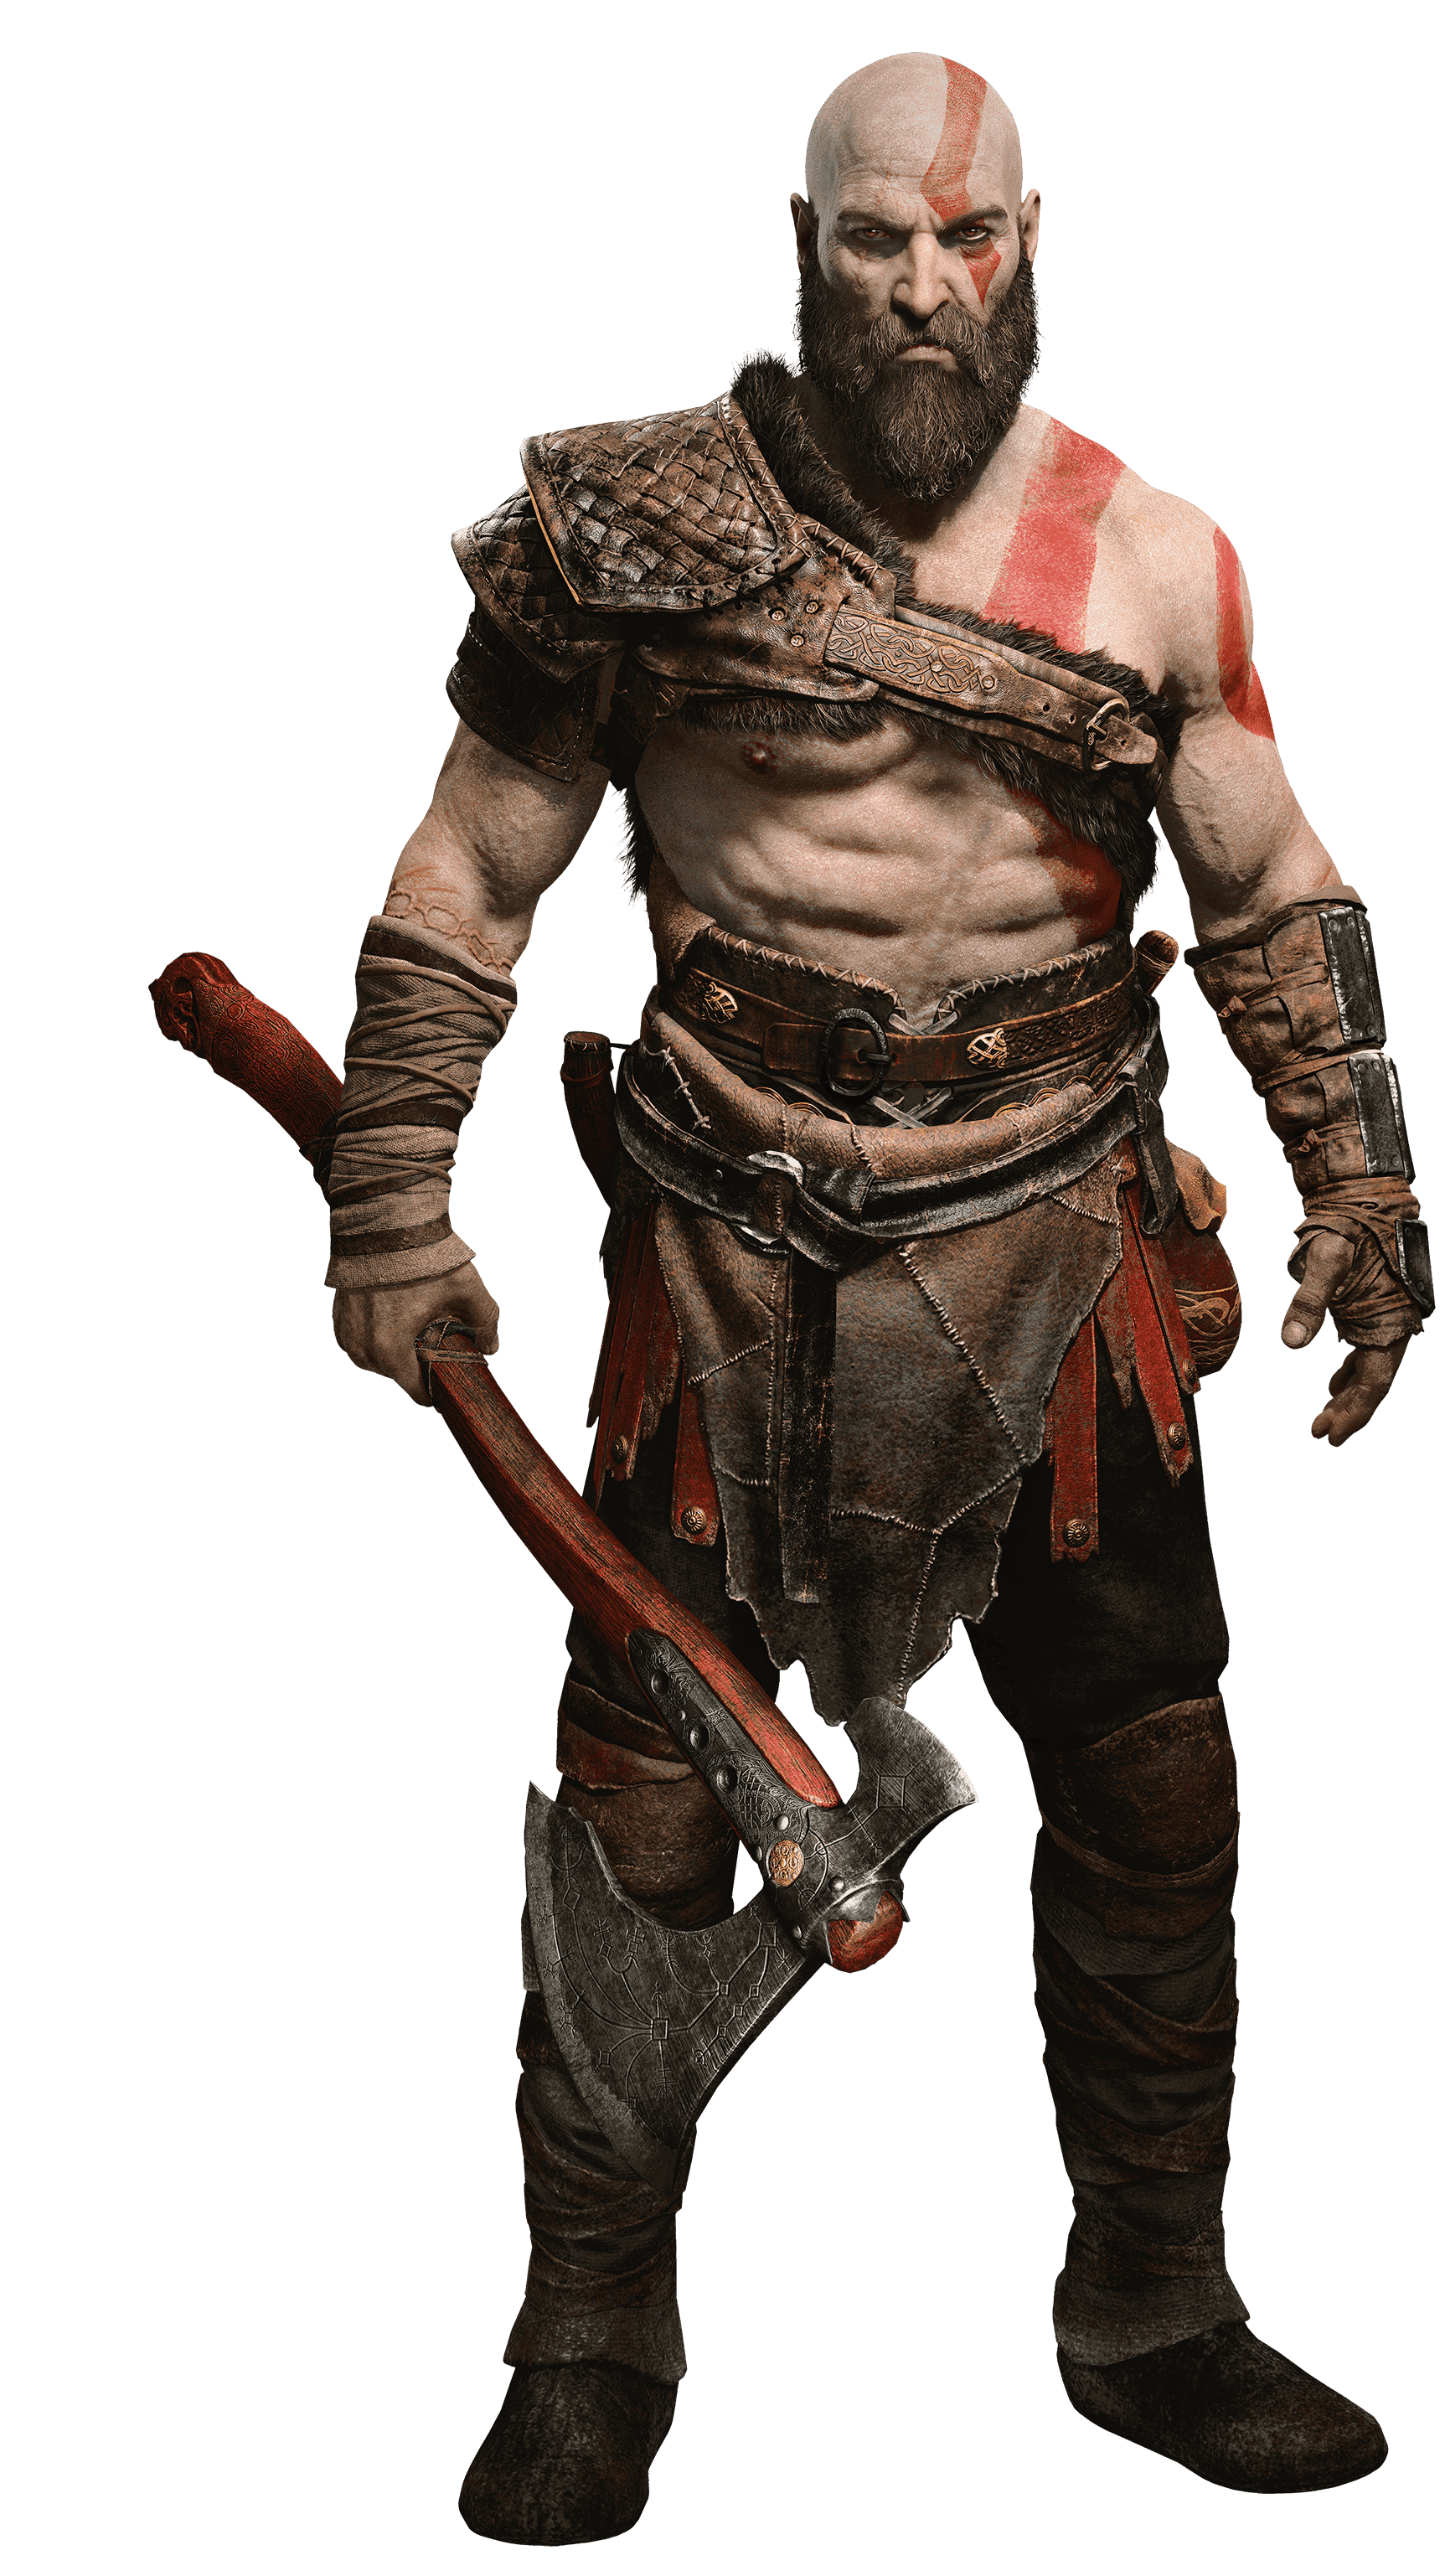 Kratos Canon God Of War The Lad Named Marx Character Stats And Profiles Wiki Fandom